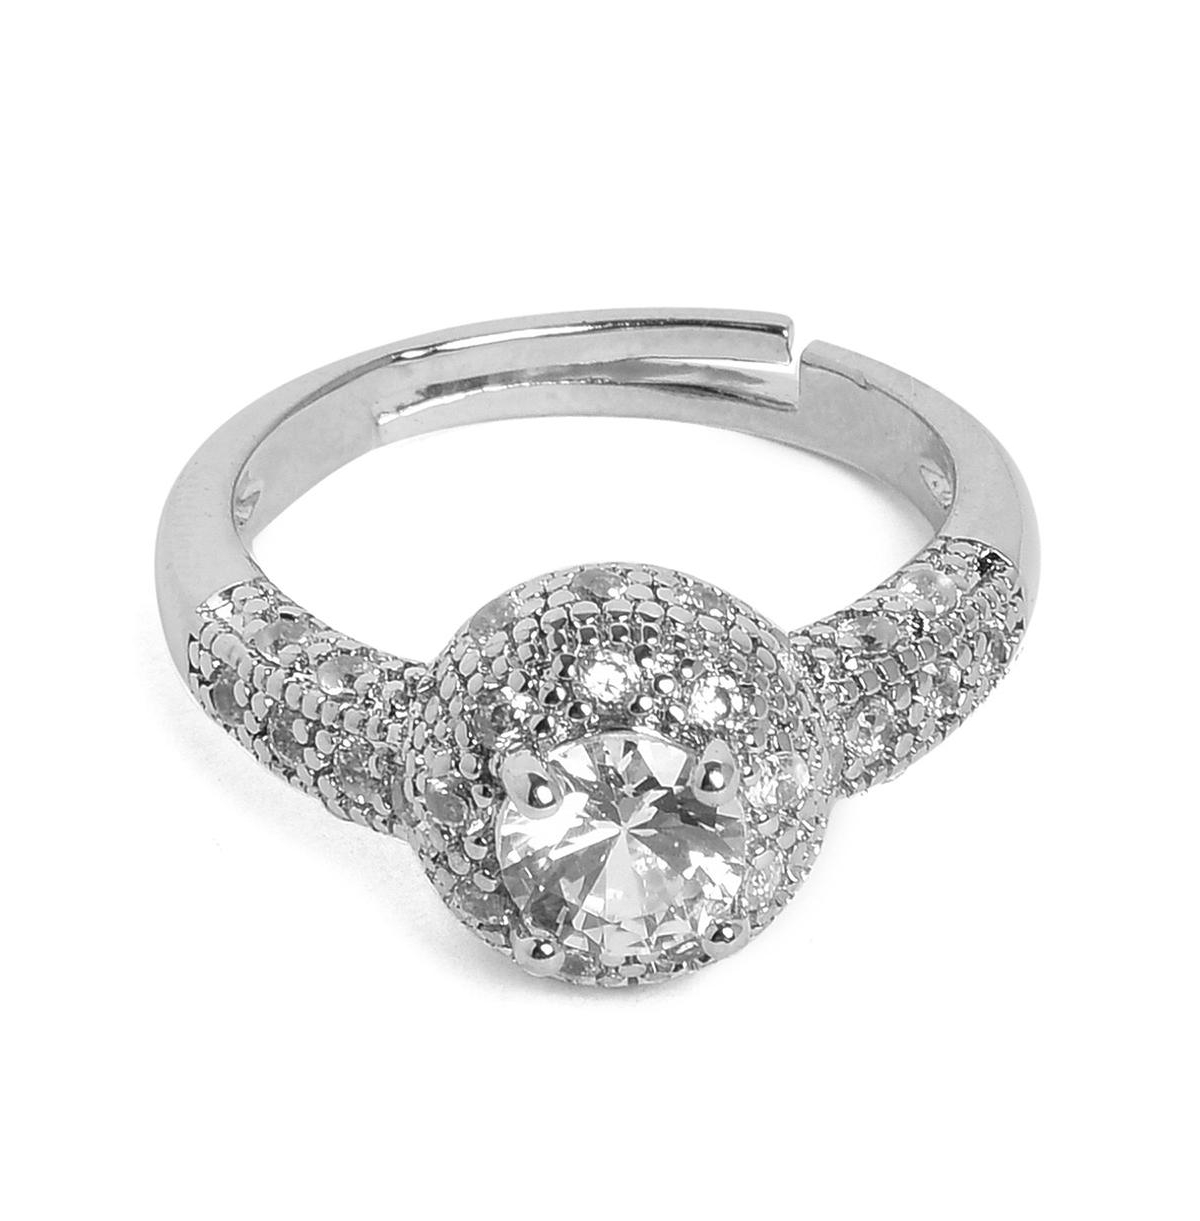 Shop Sohi Women's Silver Crystal Cocktail Ring